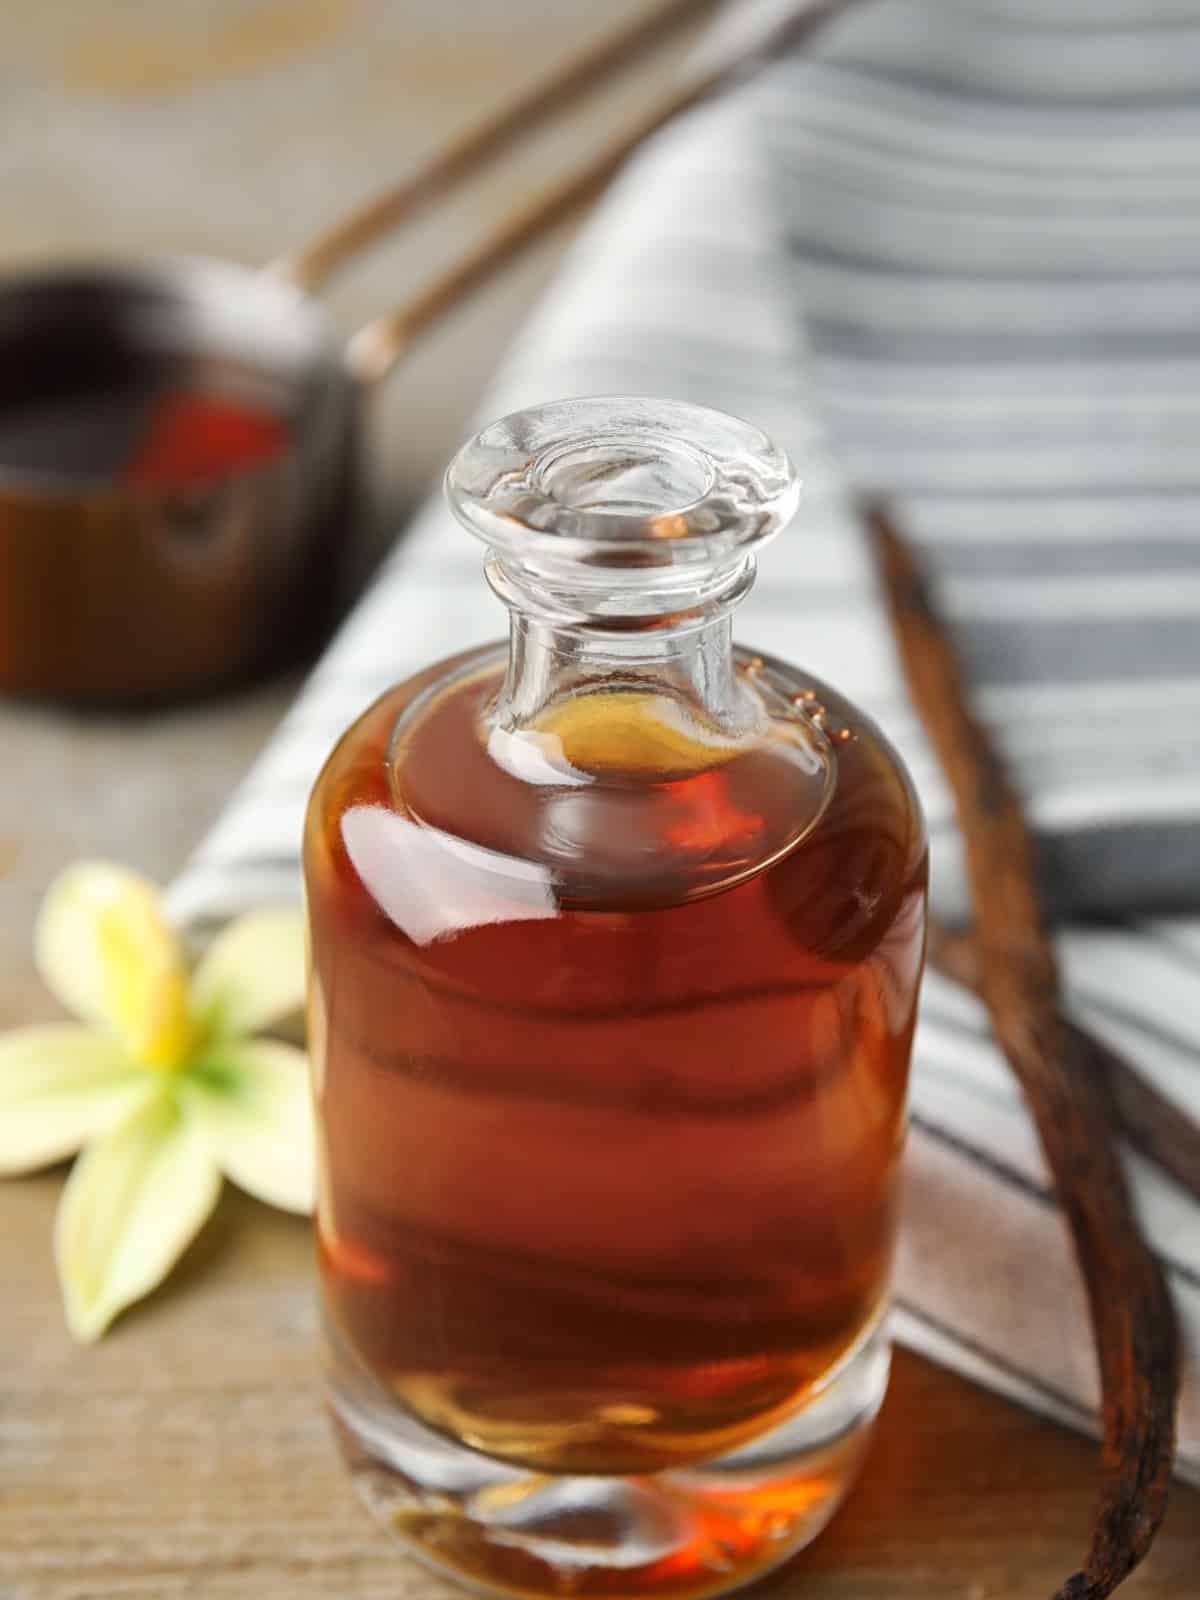 vanilla extract in a glass jar